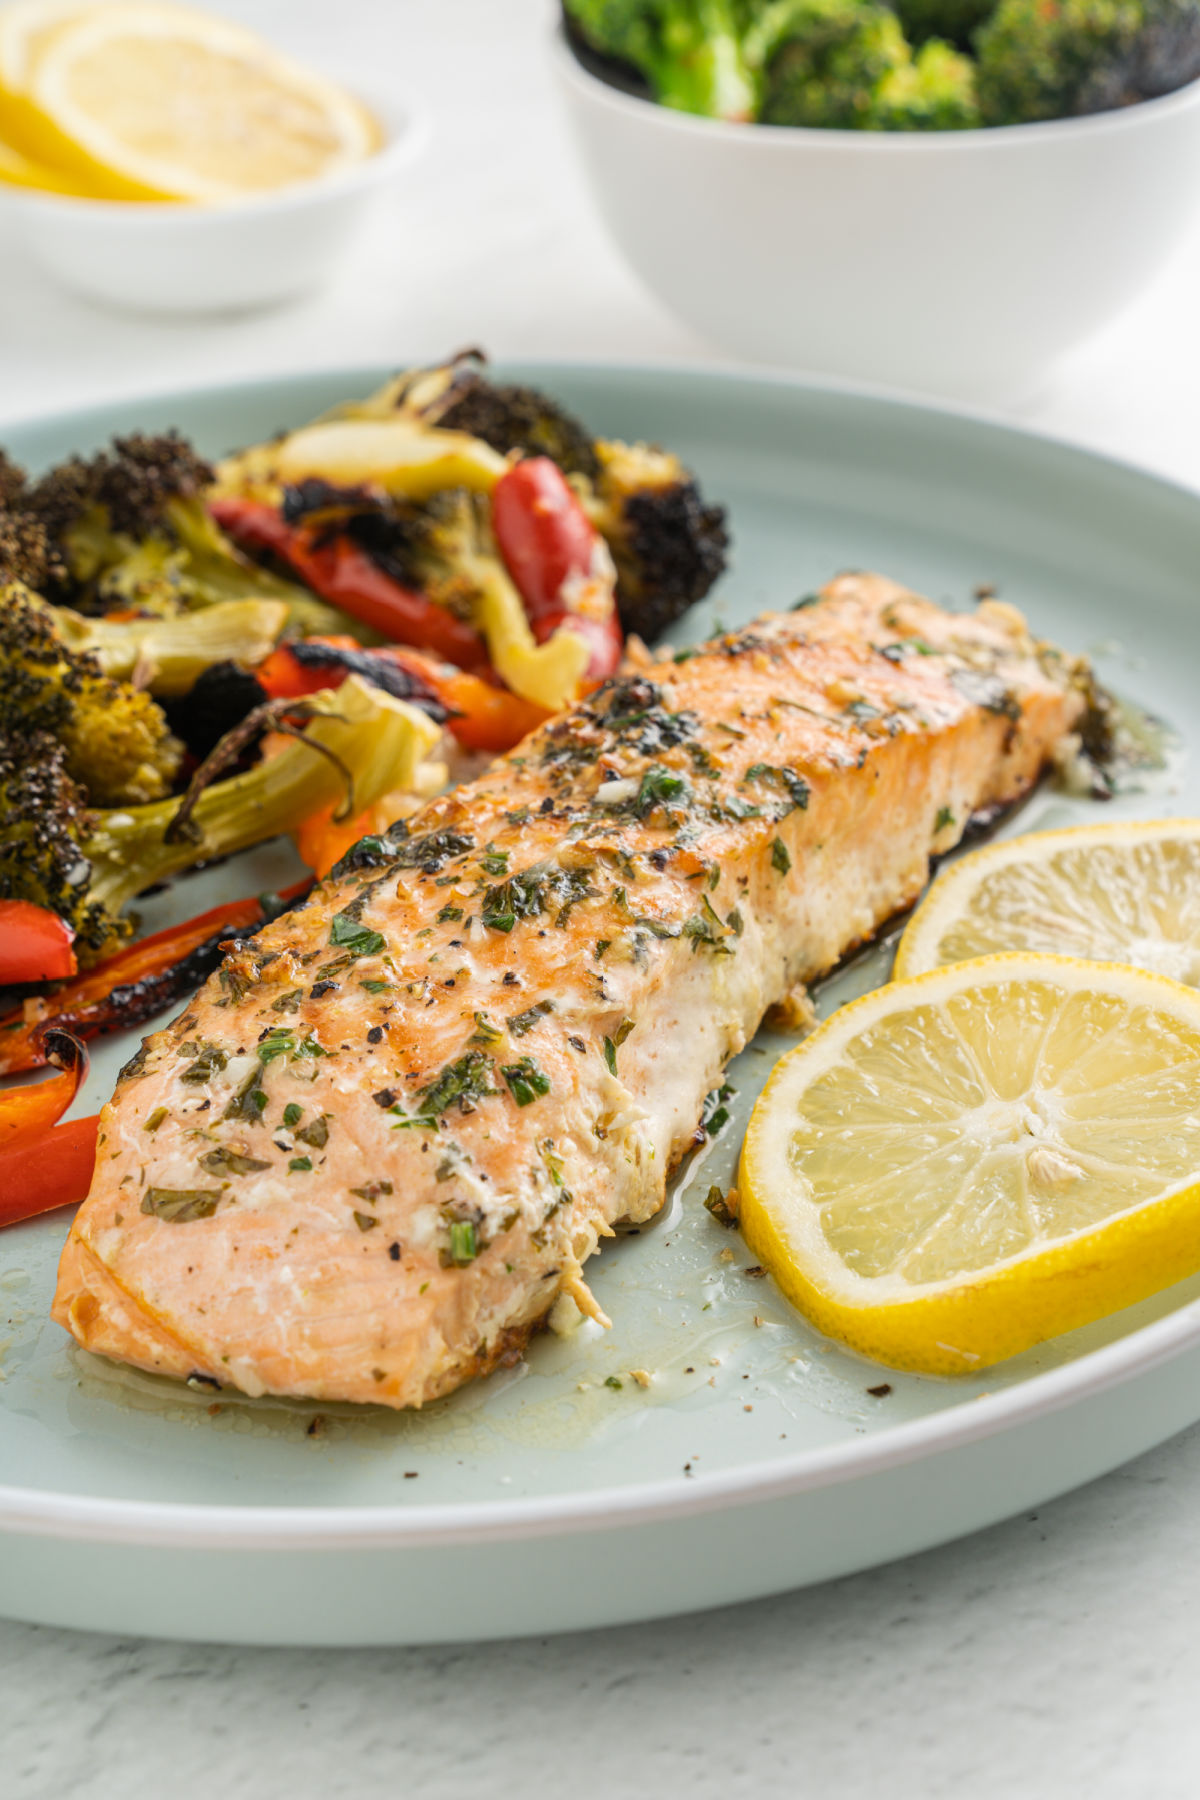 Garlic butter salmon served on a blue plate with roasted vegetables.